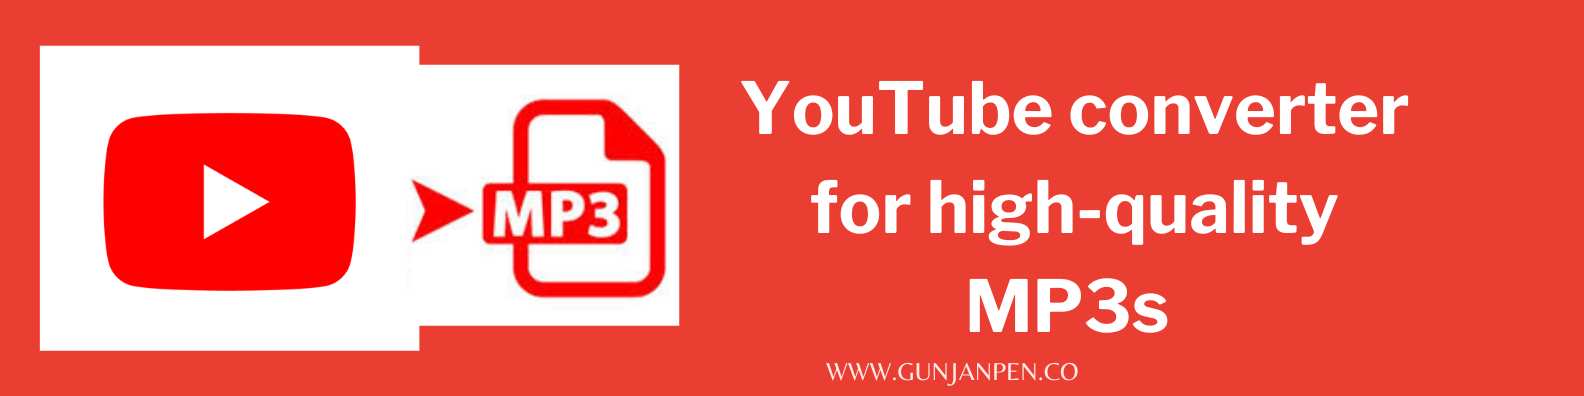 How to Use a YouTube Converter for High-Quality MP3s